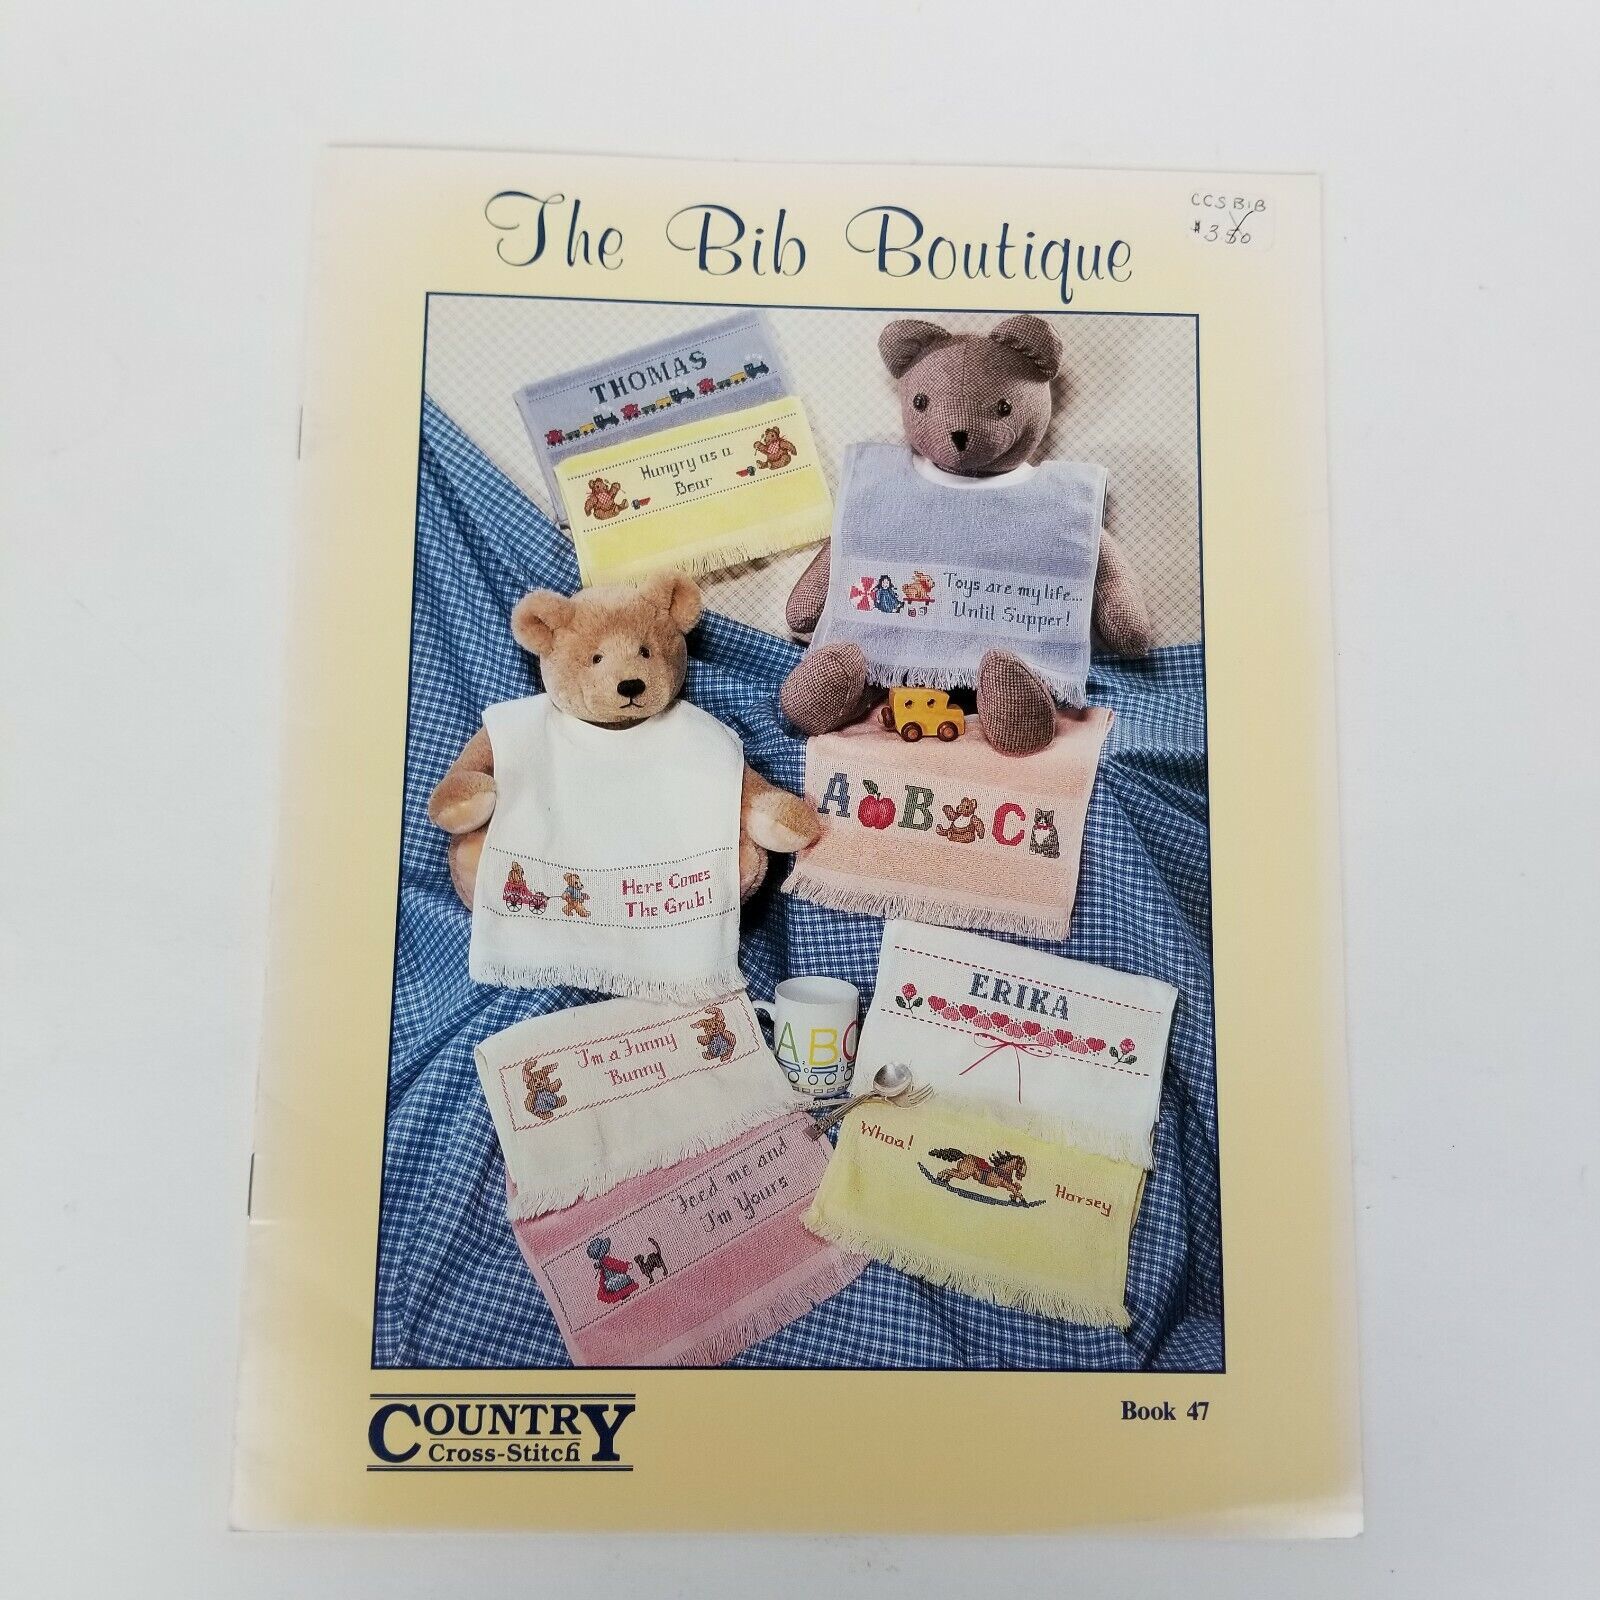 VINTAGE The Bib Boutique Cross Stitch Pattern Book 47 by Country Cross-Stitch - $7.92